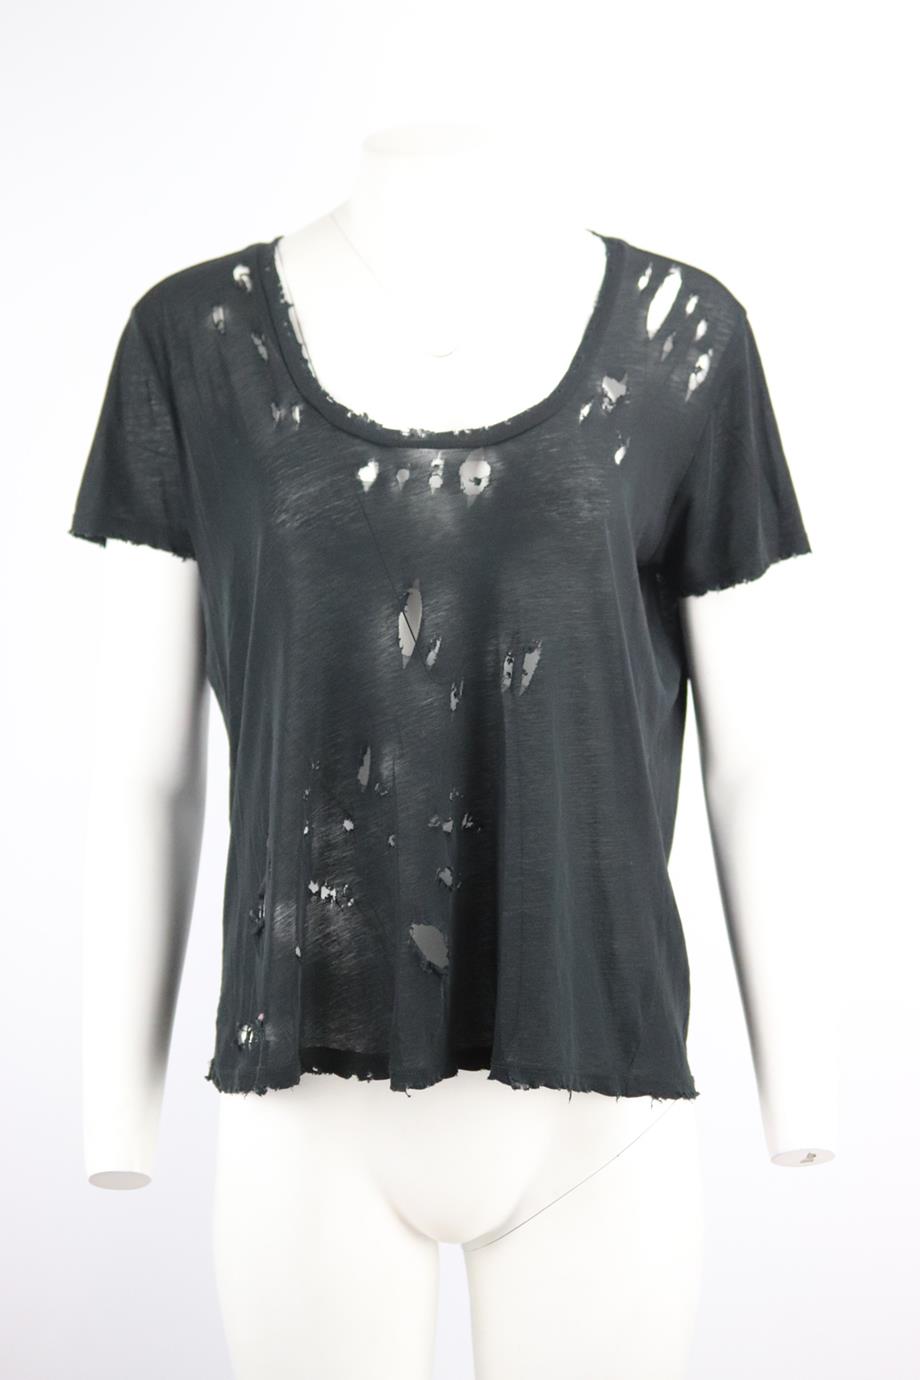 UNRAVEL PROJECT DISTRESSED COTTON JERSEY T-SHIRT SMALL